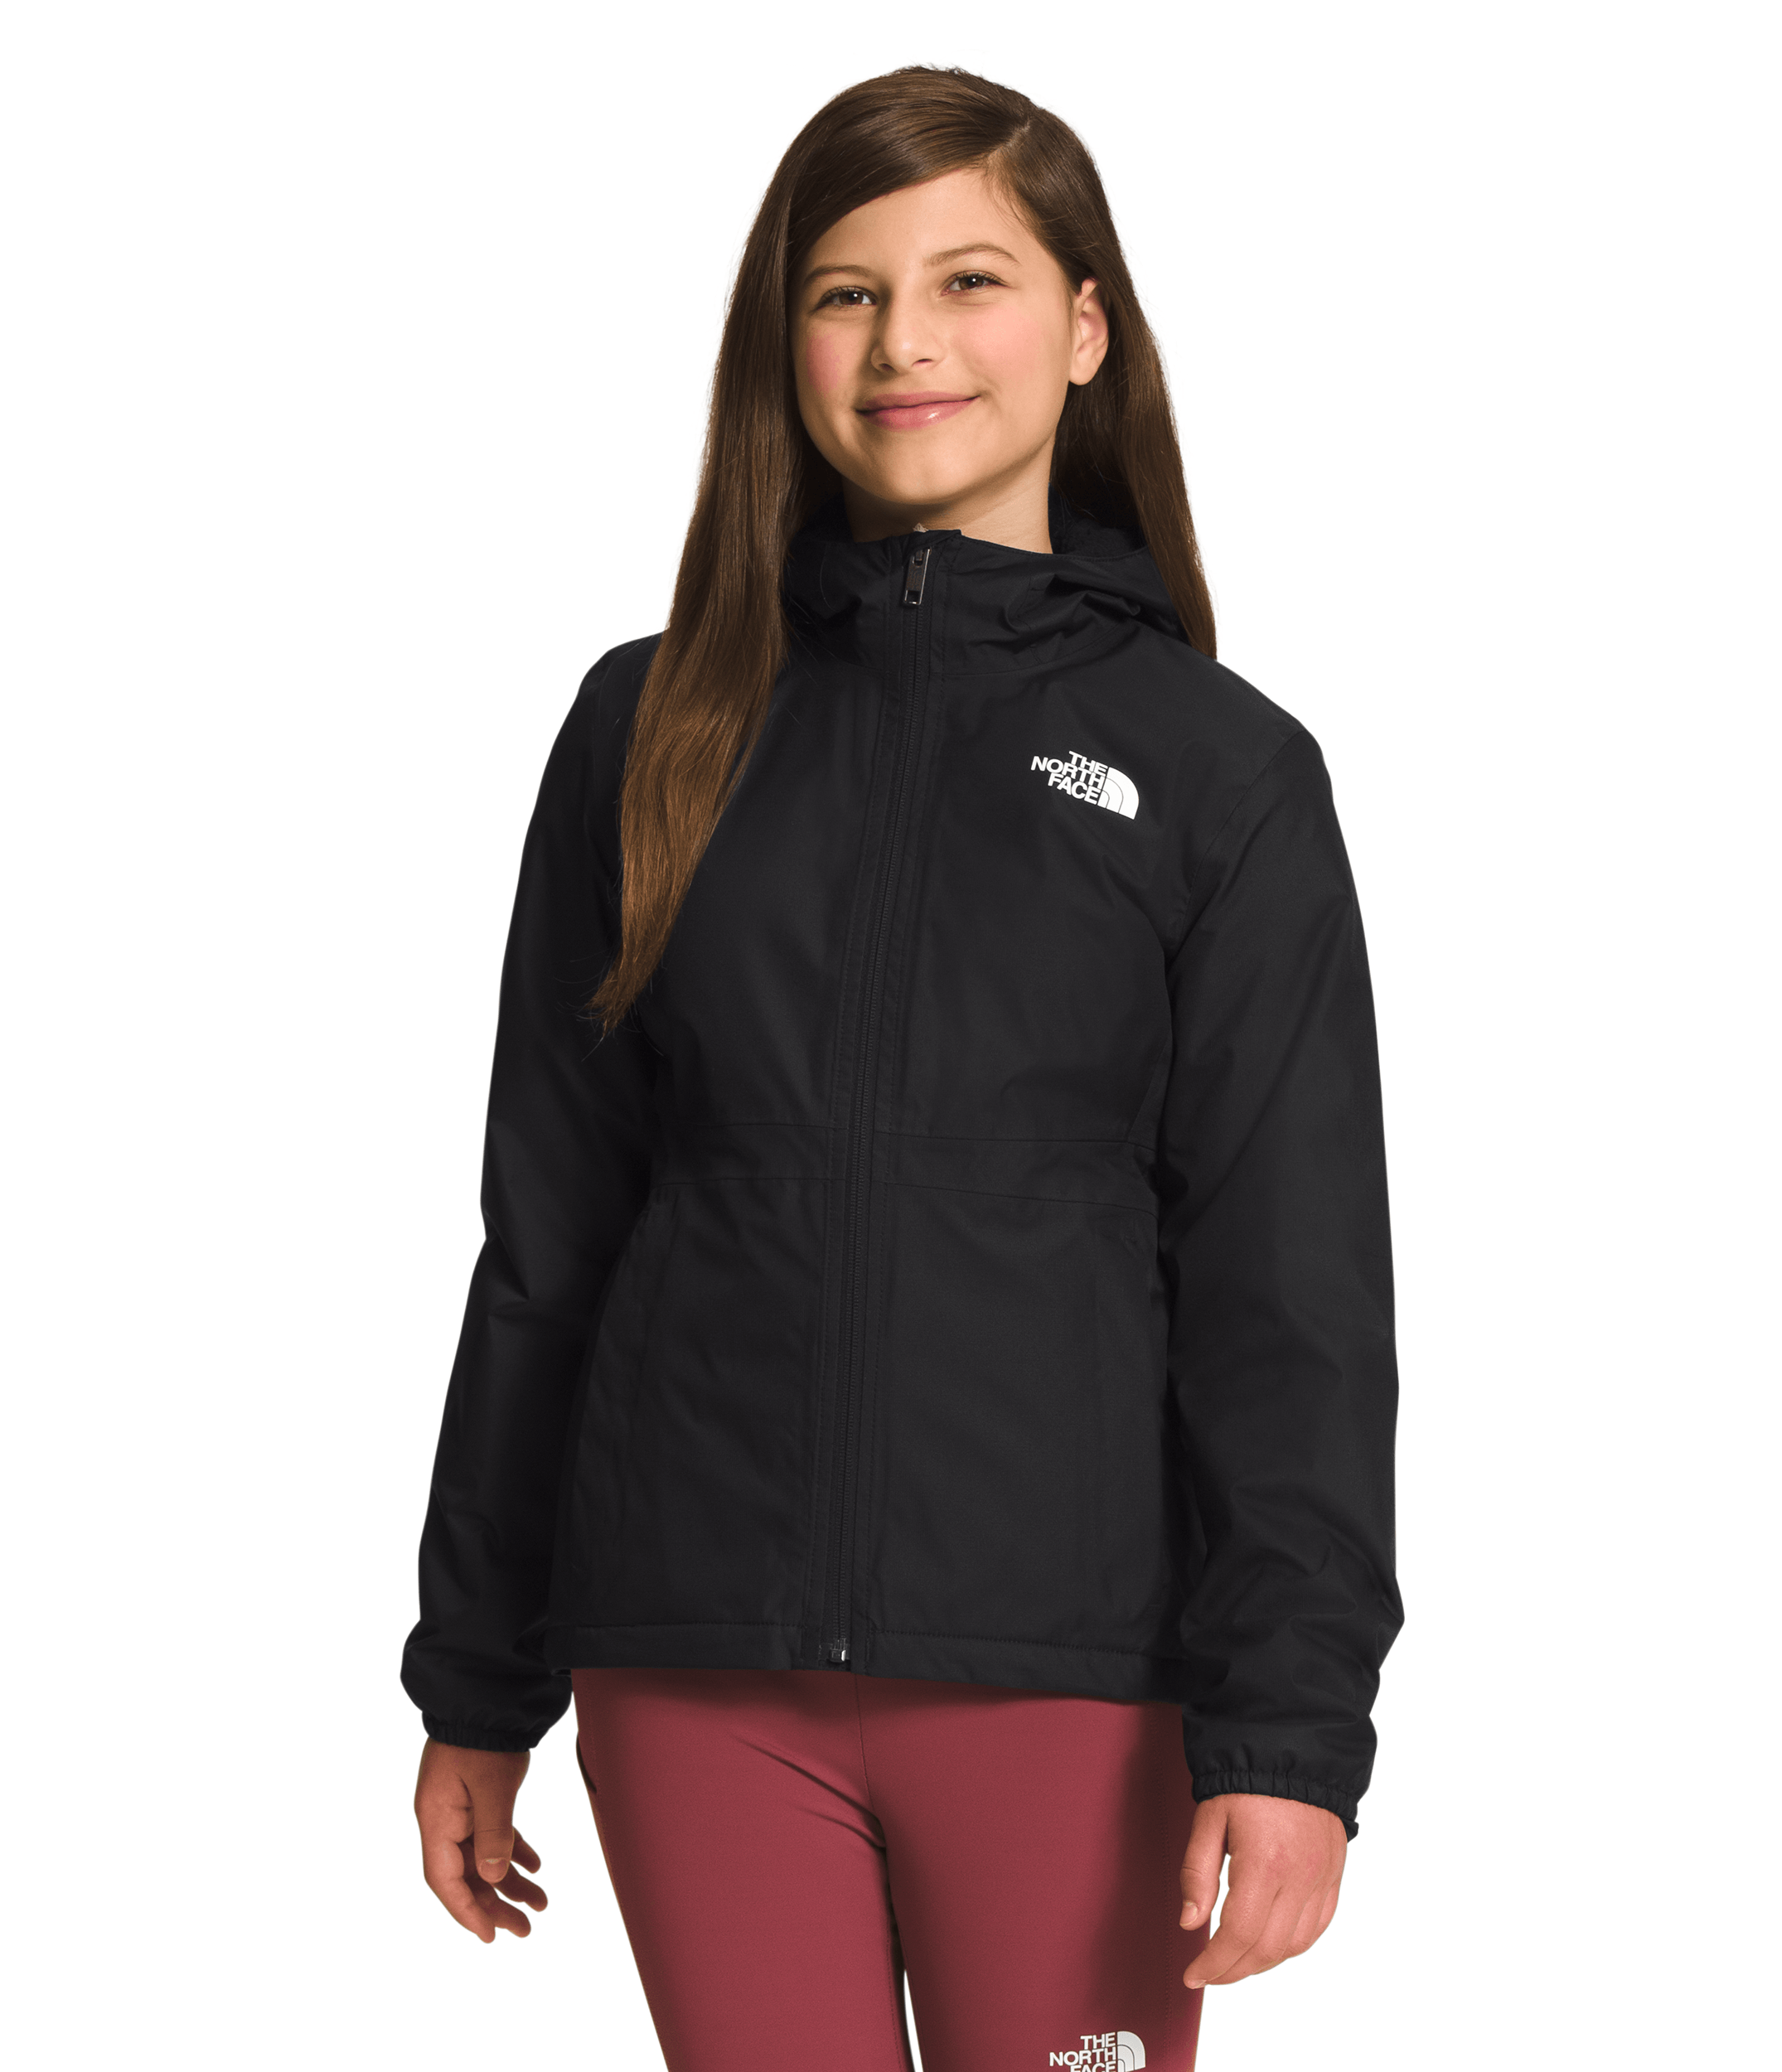 Smiling girl wearing Black The North Face Girls' Warm Storm Jacket - Mountain Kids Outfitters: Stylish and Weather-Ready Outerwear